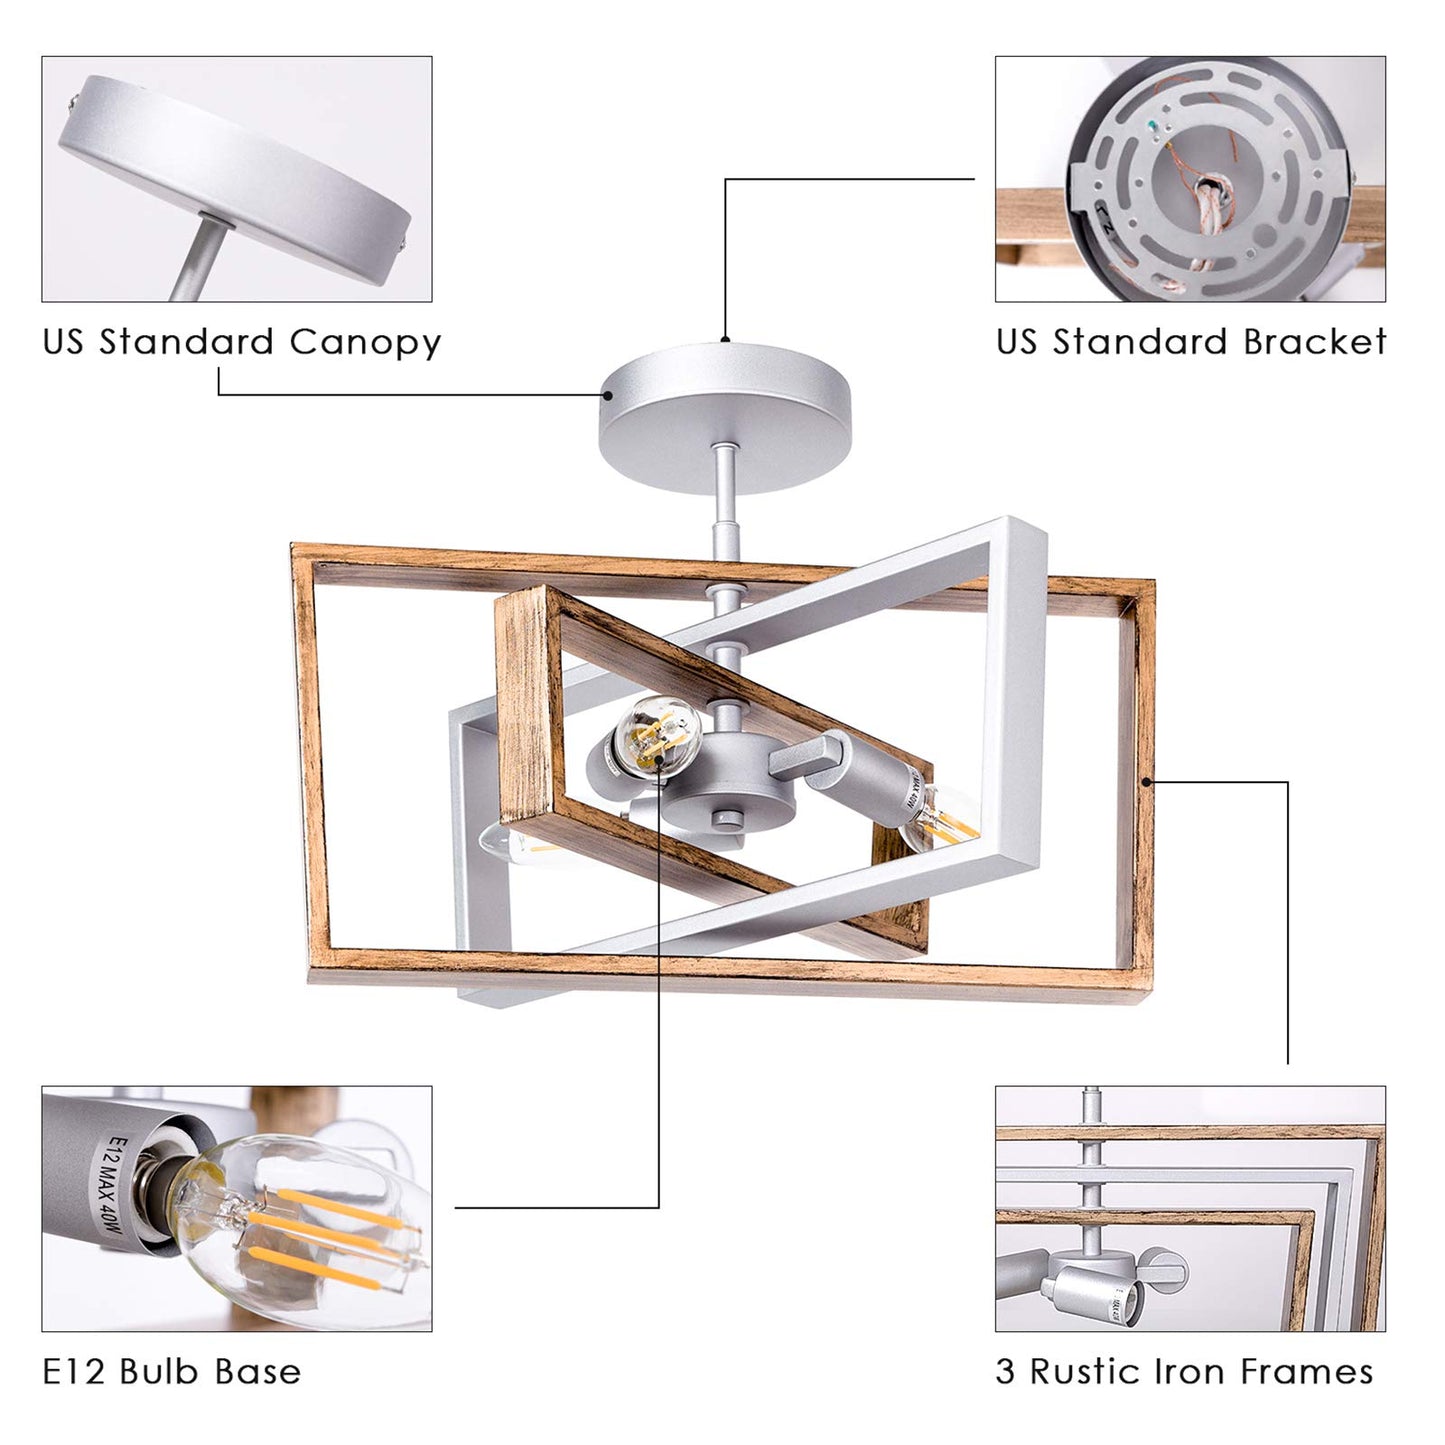 Dailyart Rotatable Ceiling Light, Rustic Ceiling Light with Adjustable Frame, Retro Vintage Industrial Flush Mount Ceiling Light for Farmhouse Living Room Bedroom Kitchen Dining Room Porch, 11.2"x16" - Like New